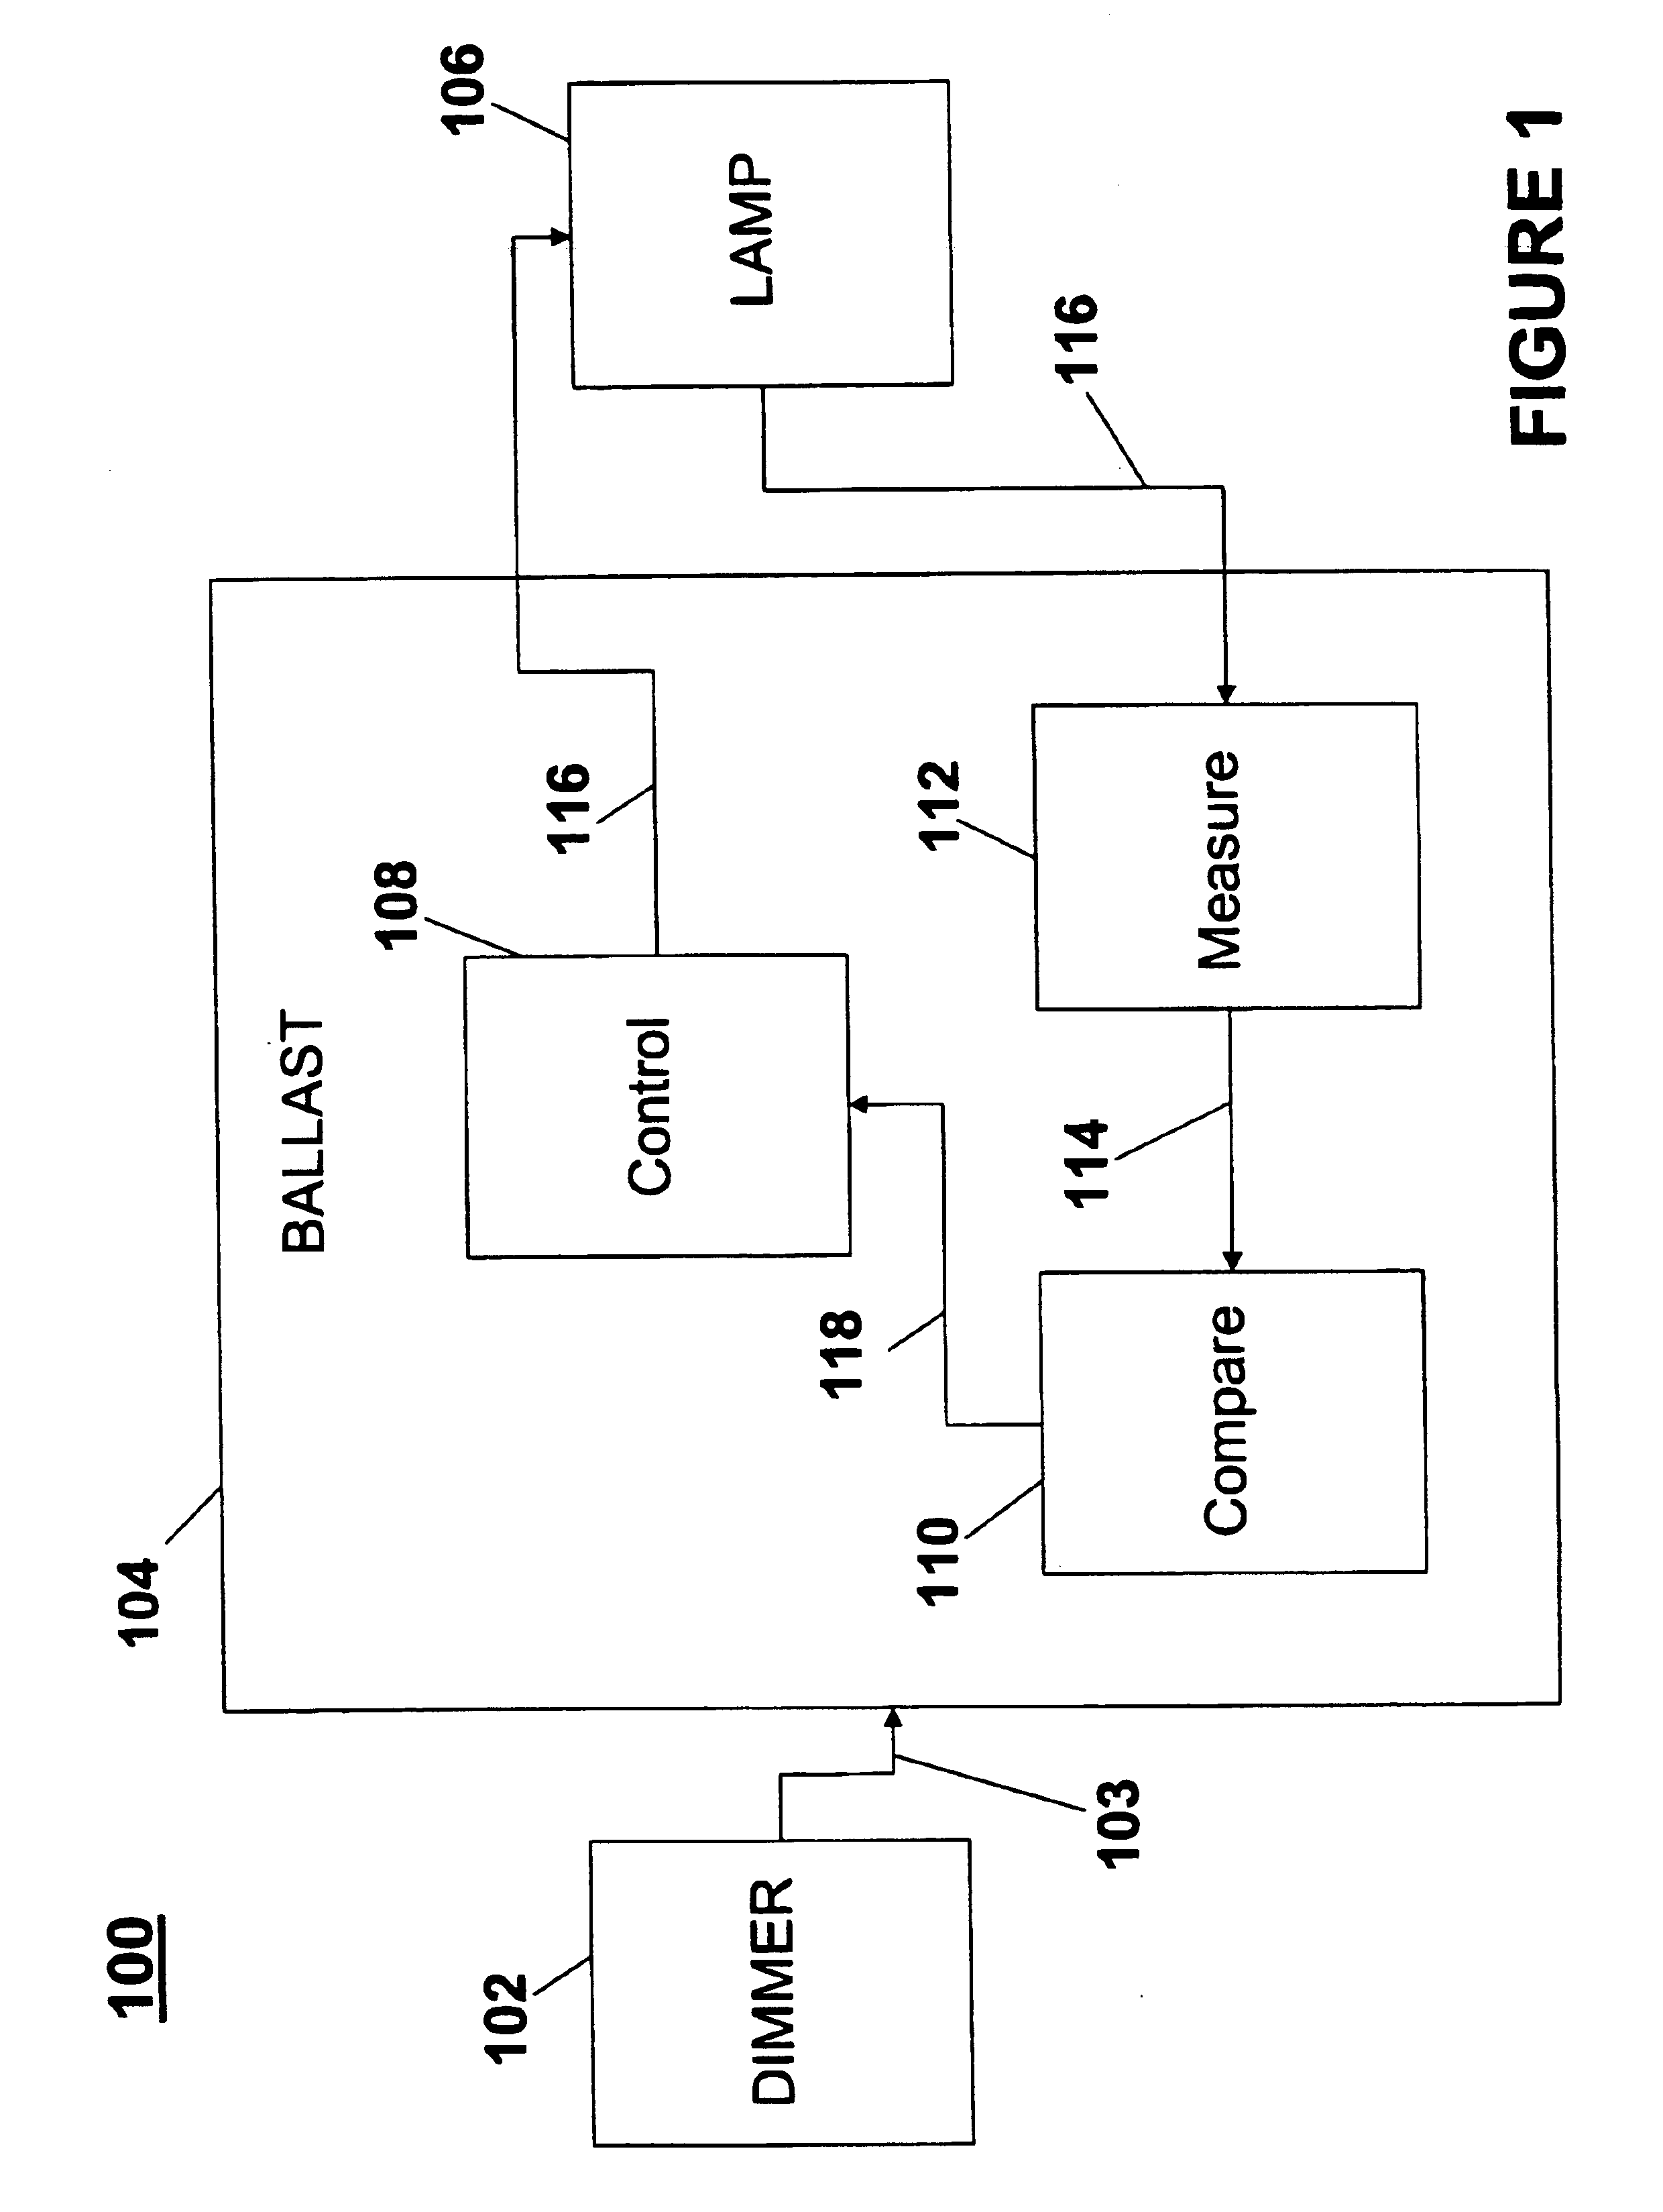 System and method for reducing flicker of compact gas discharge lamps at low lamp light output level